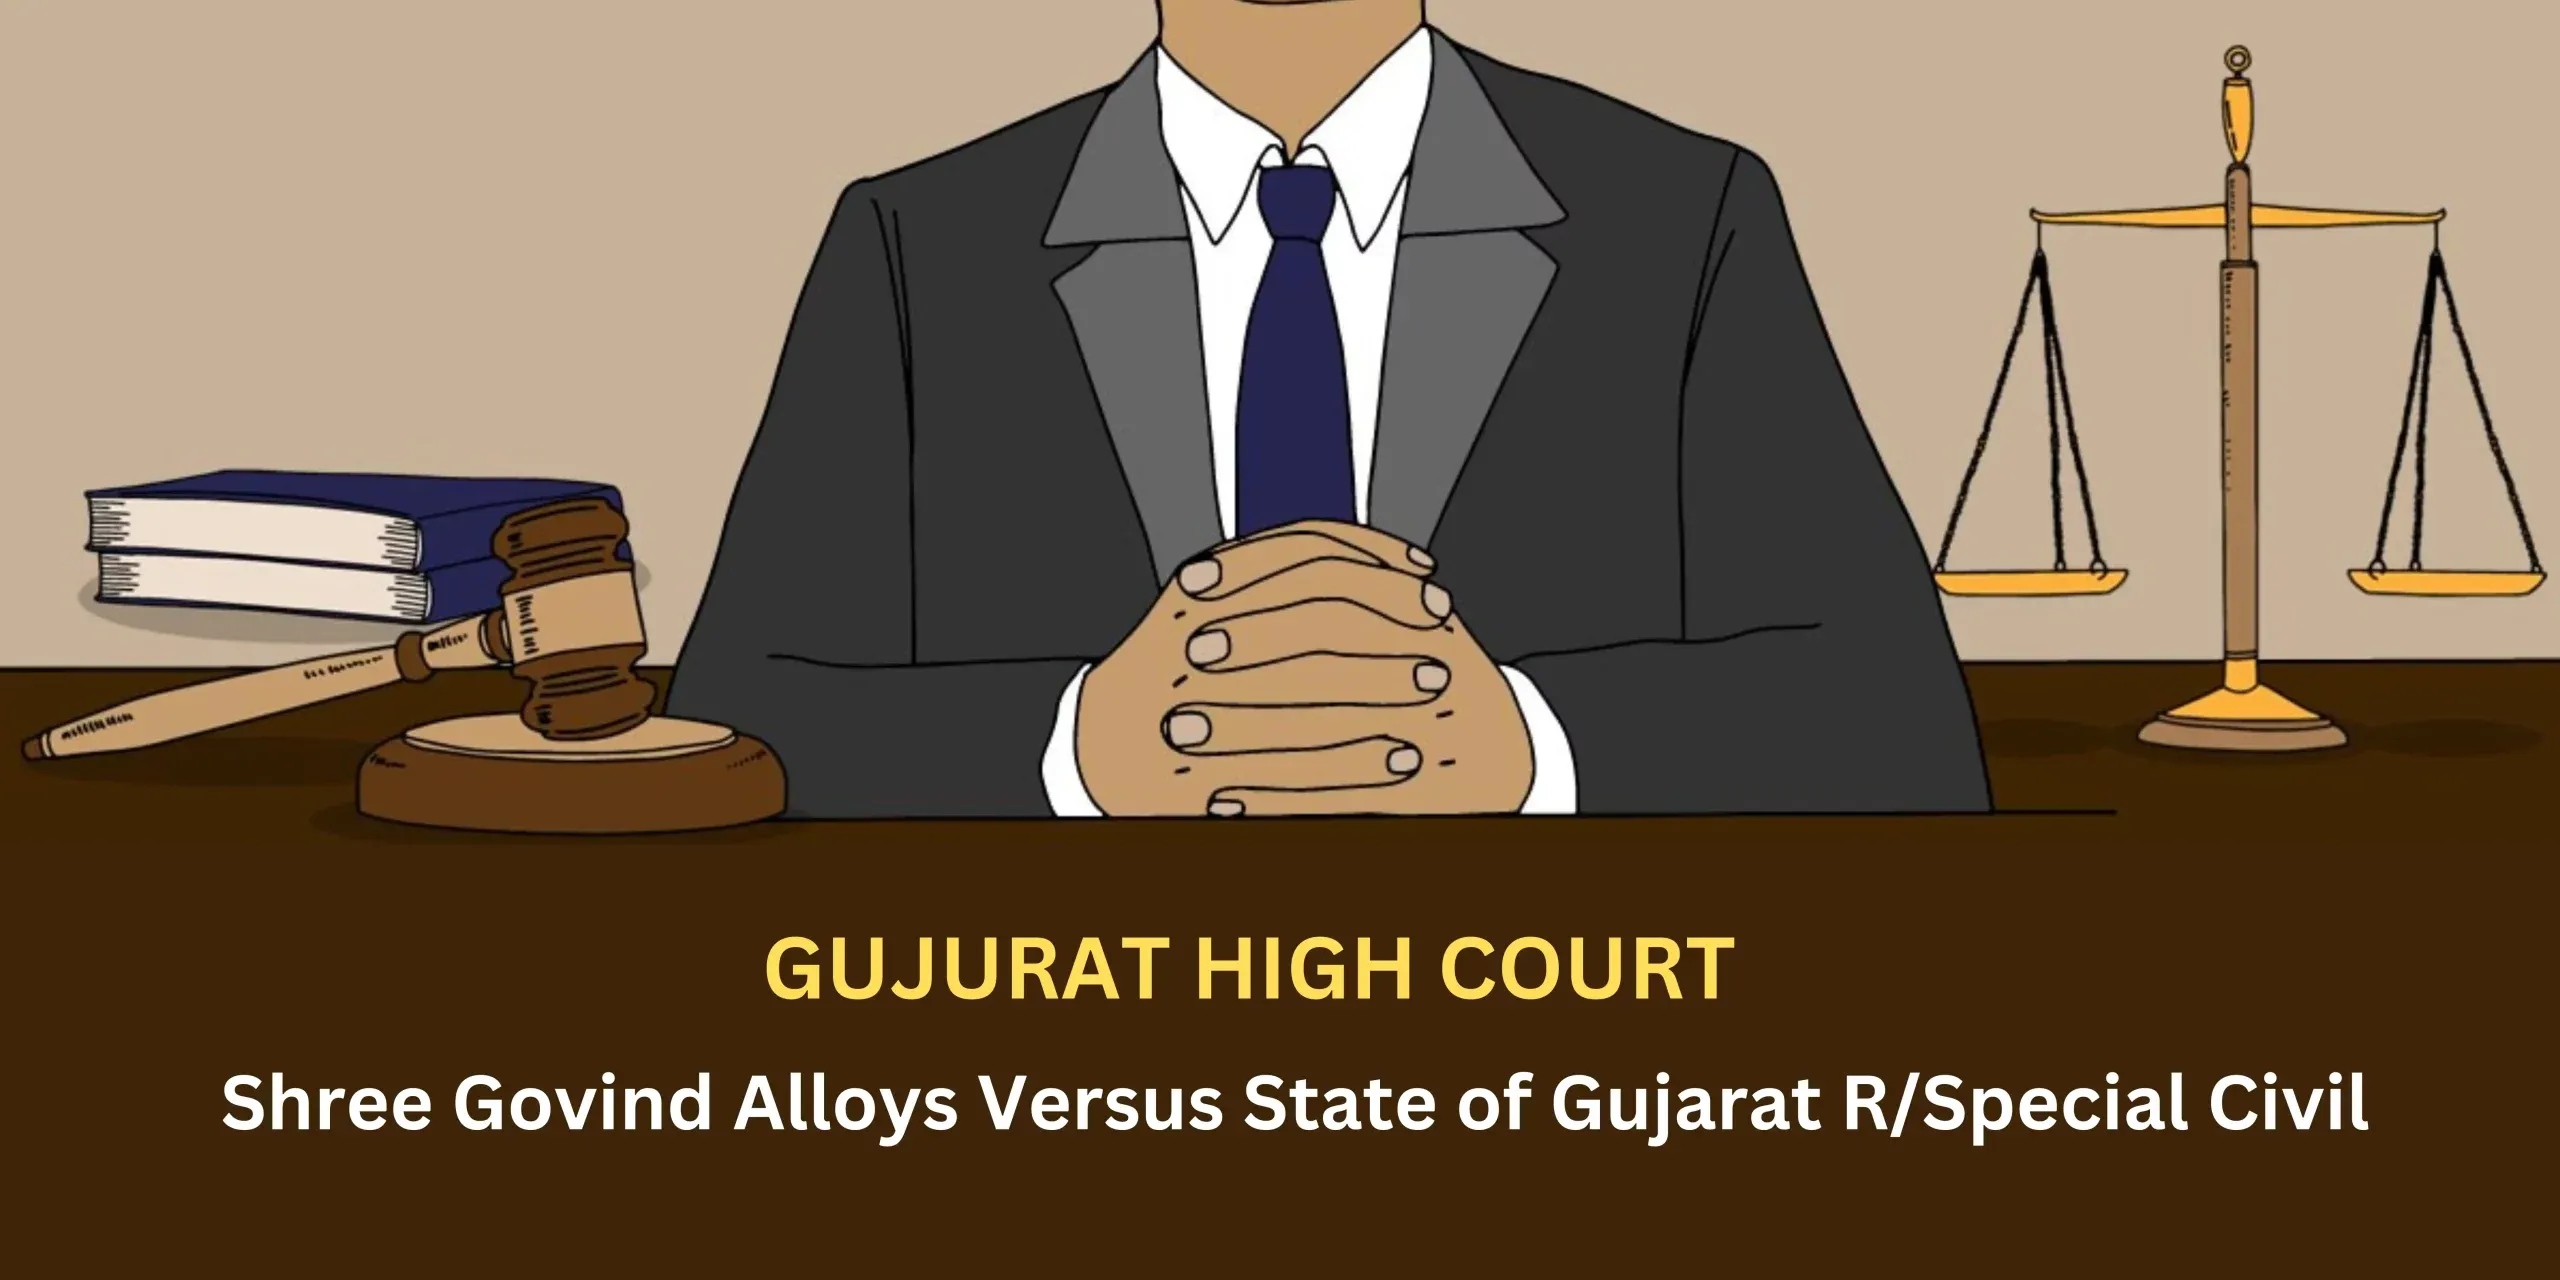 Decoding the Judgement of the case of Shree Govind Alloys Versus State of Gujarat R/Special